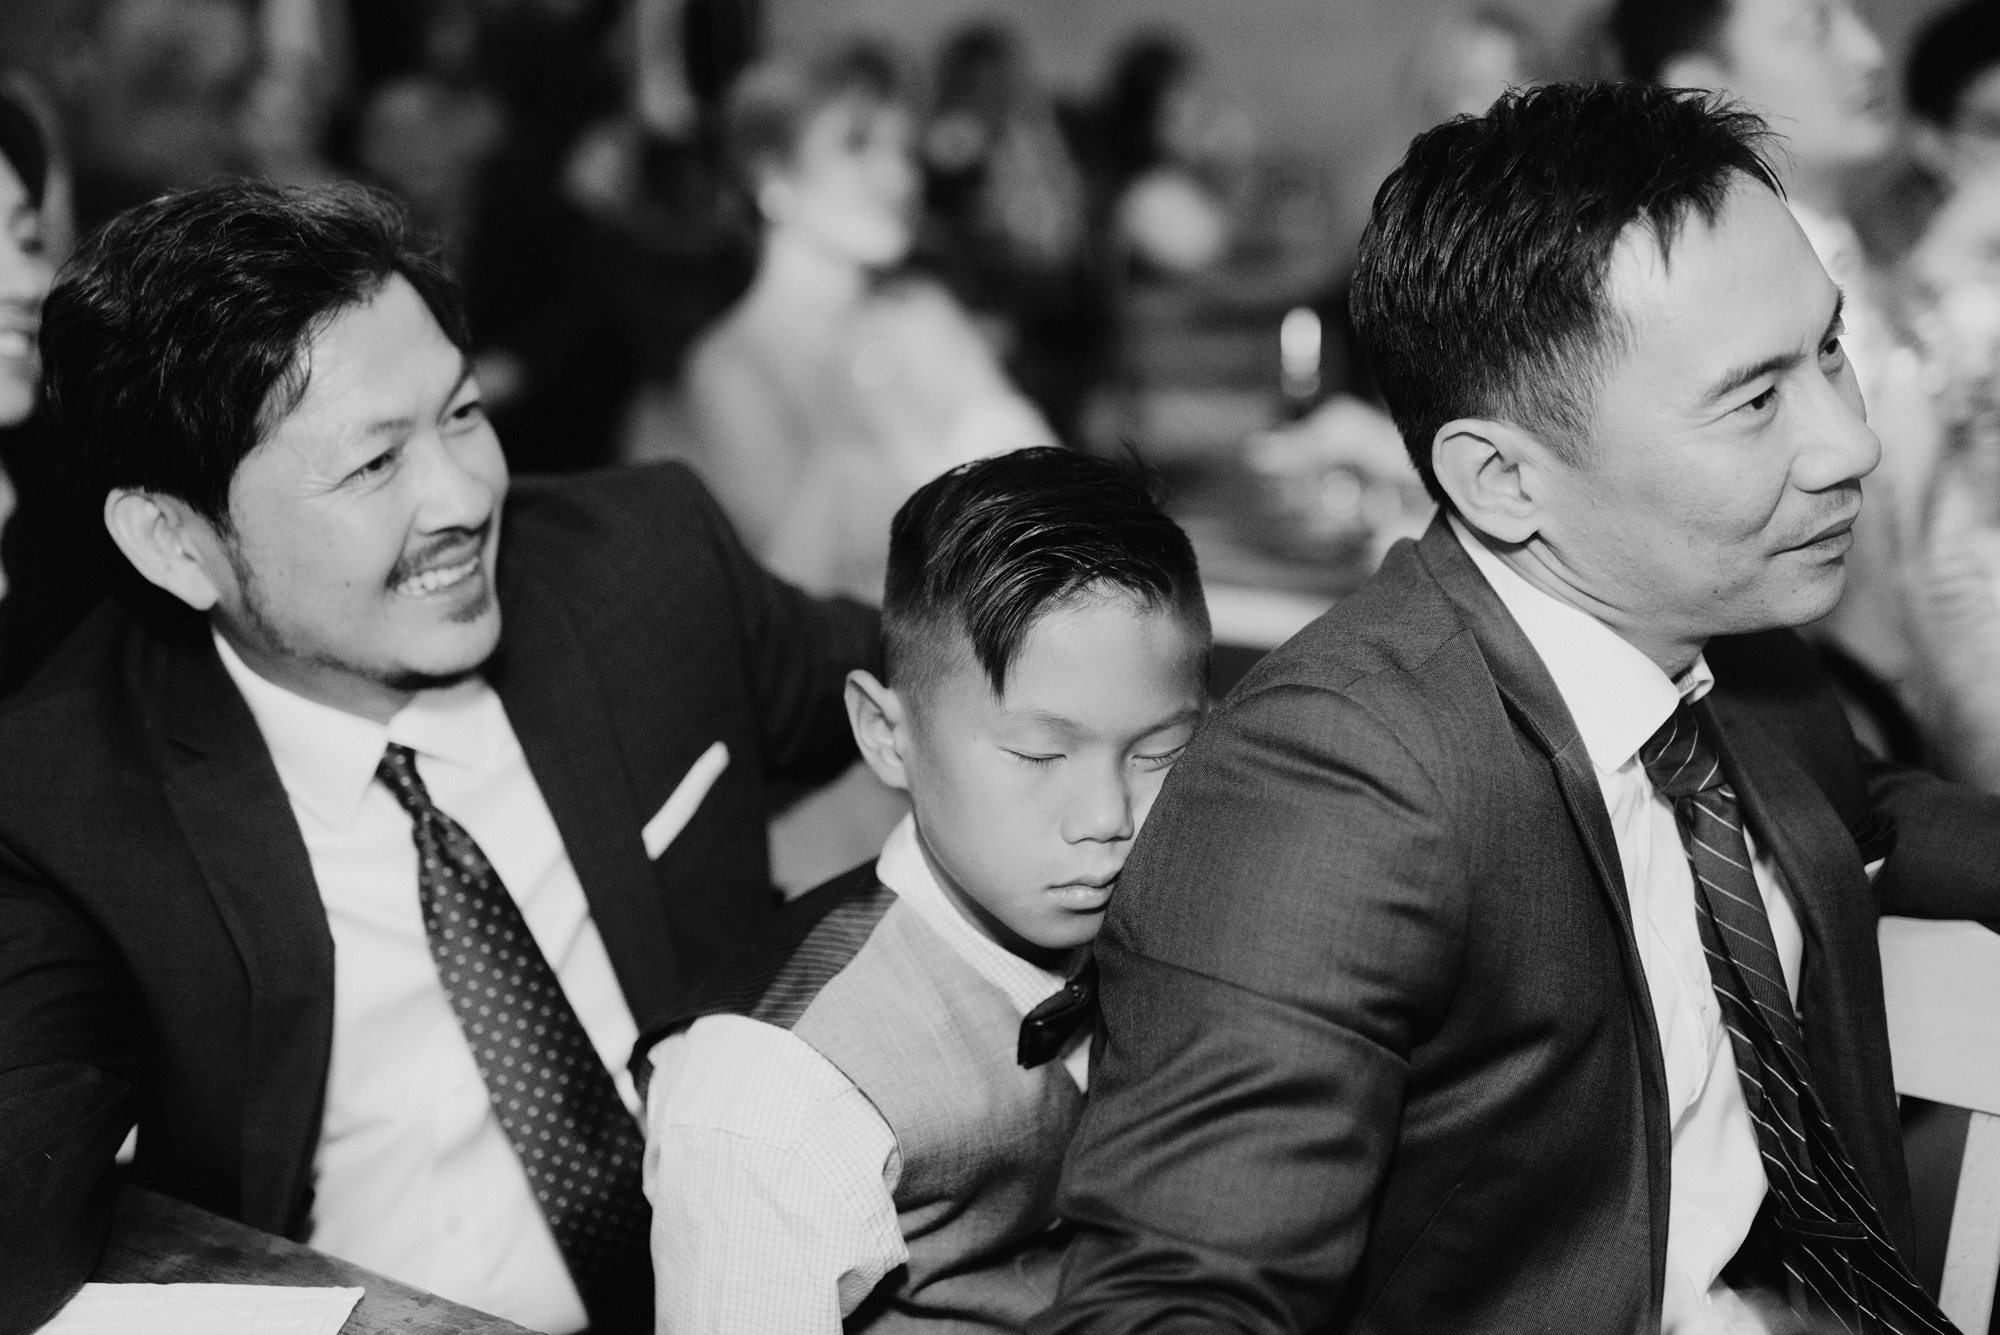 Child falling asleep while leaning on wedding guests at Foreign Cinema in San Francisco, CA